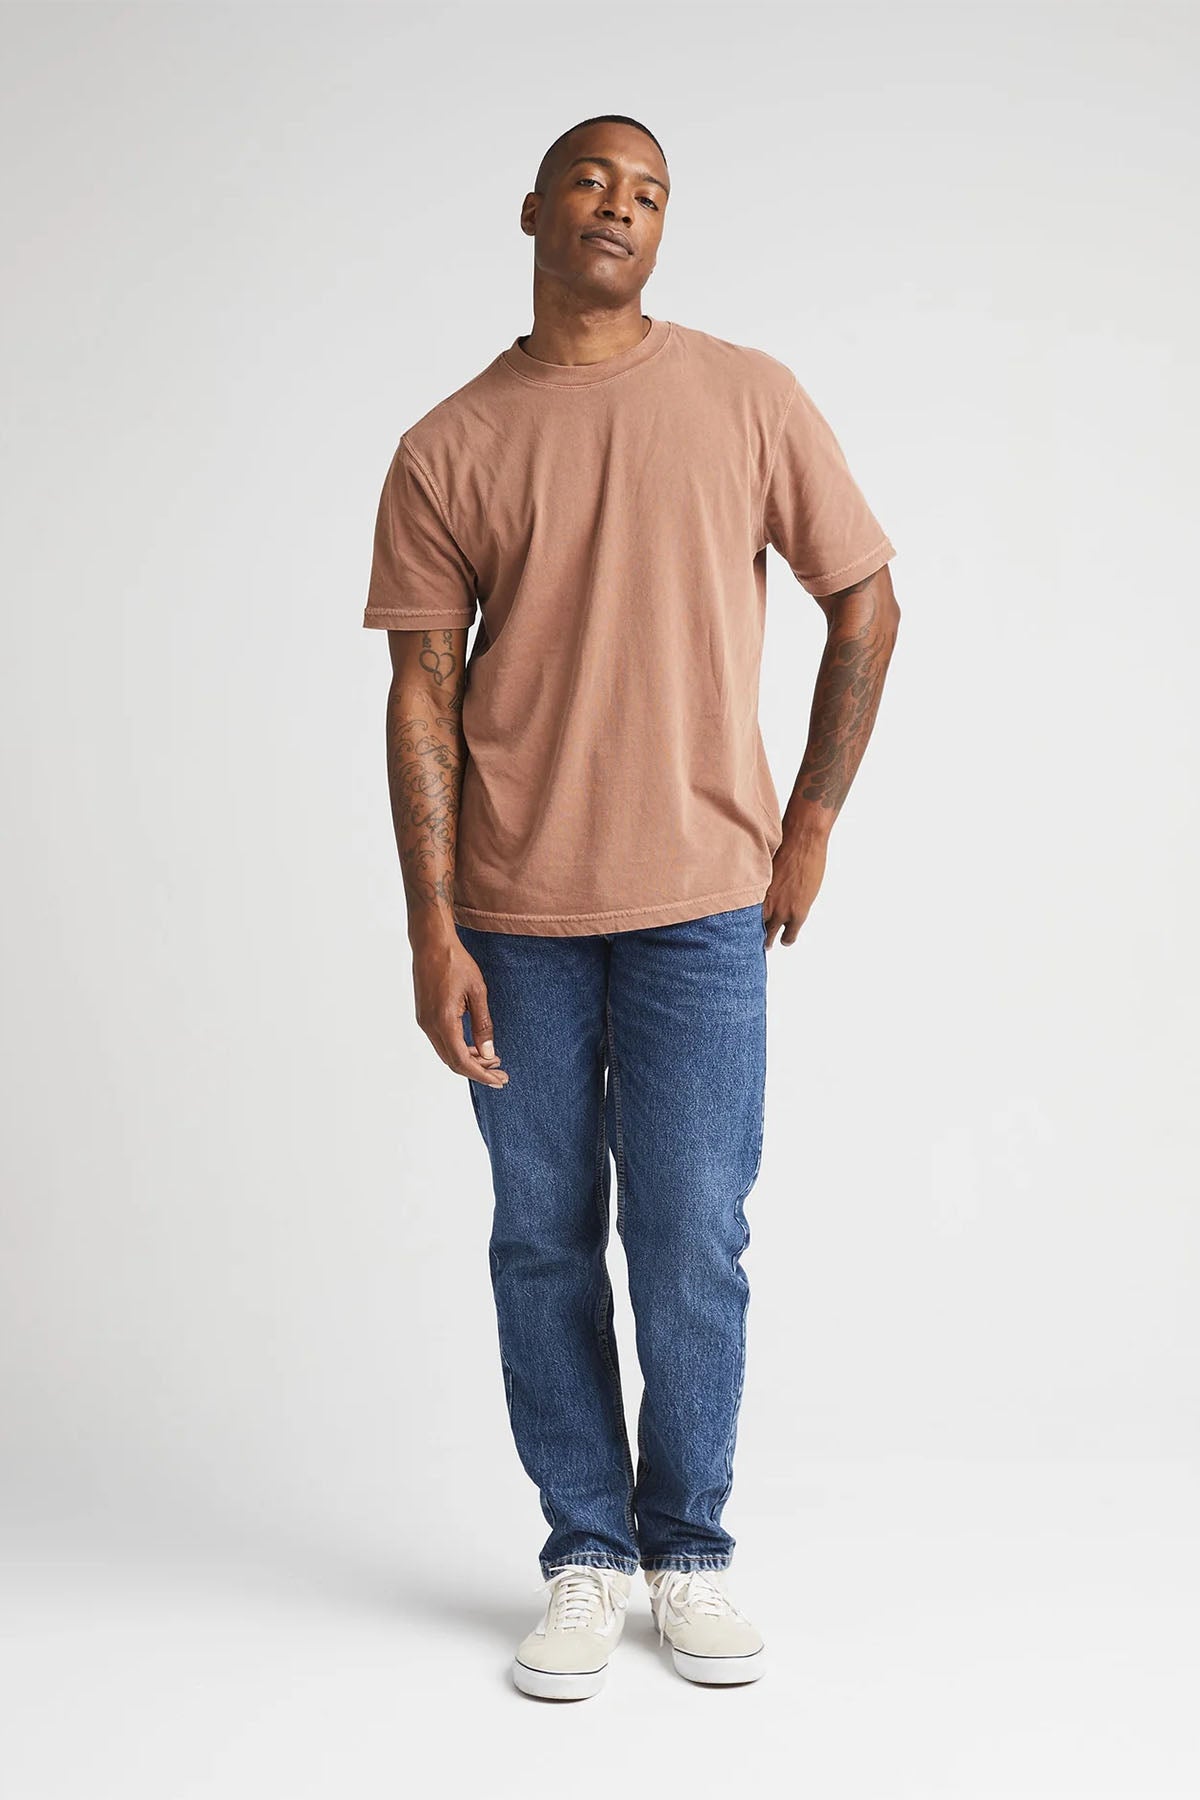 Richer Poorer - Relaxed SS Tee - Latte - Front